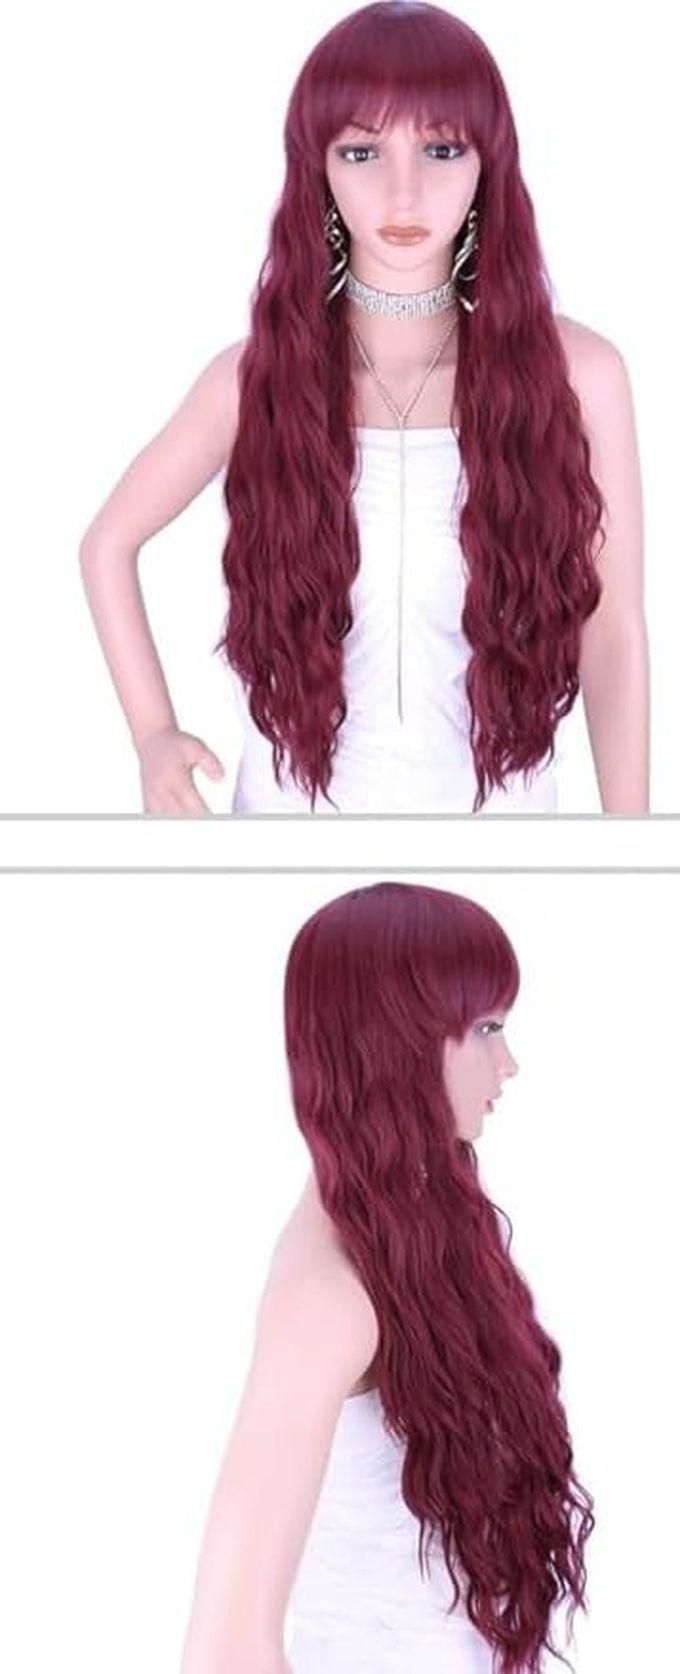 Women's Purple Long Curly Synthetic Wig, Medium Length Part, Cosplay Party Wig